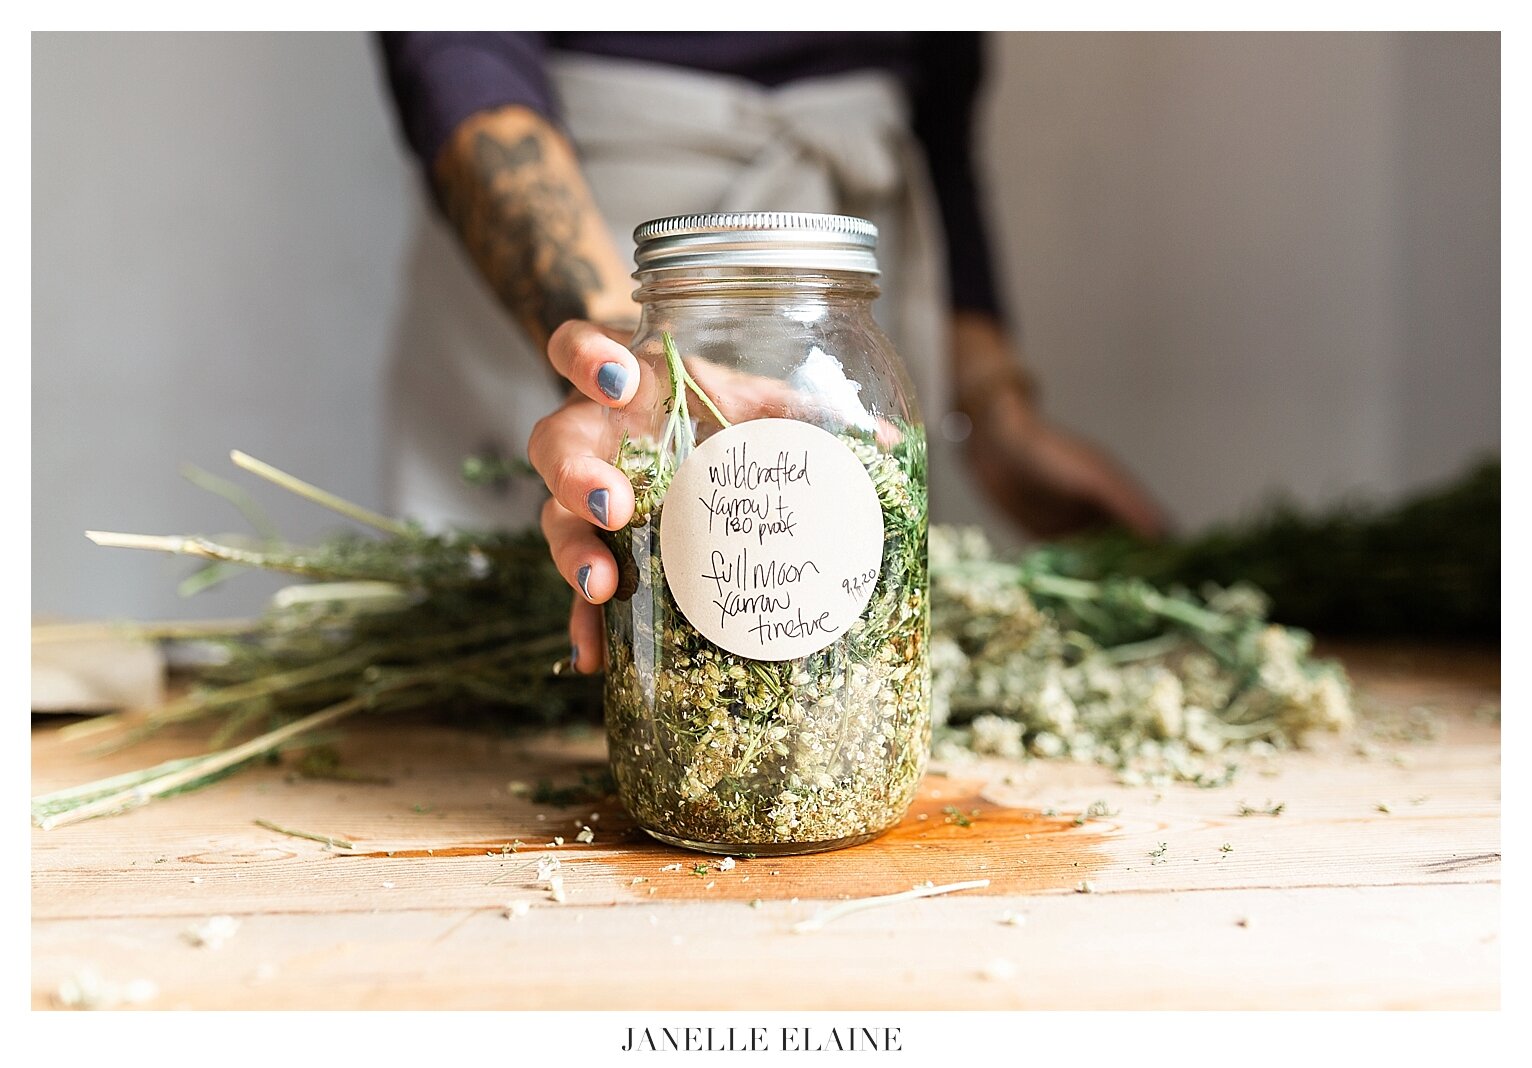 roots-revival-herbal-remedies-products-janelle-elaine-photography-houghton-michigan-51.jpg